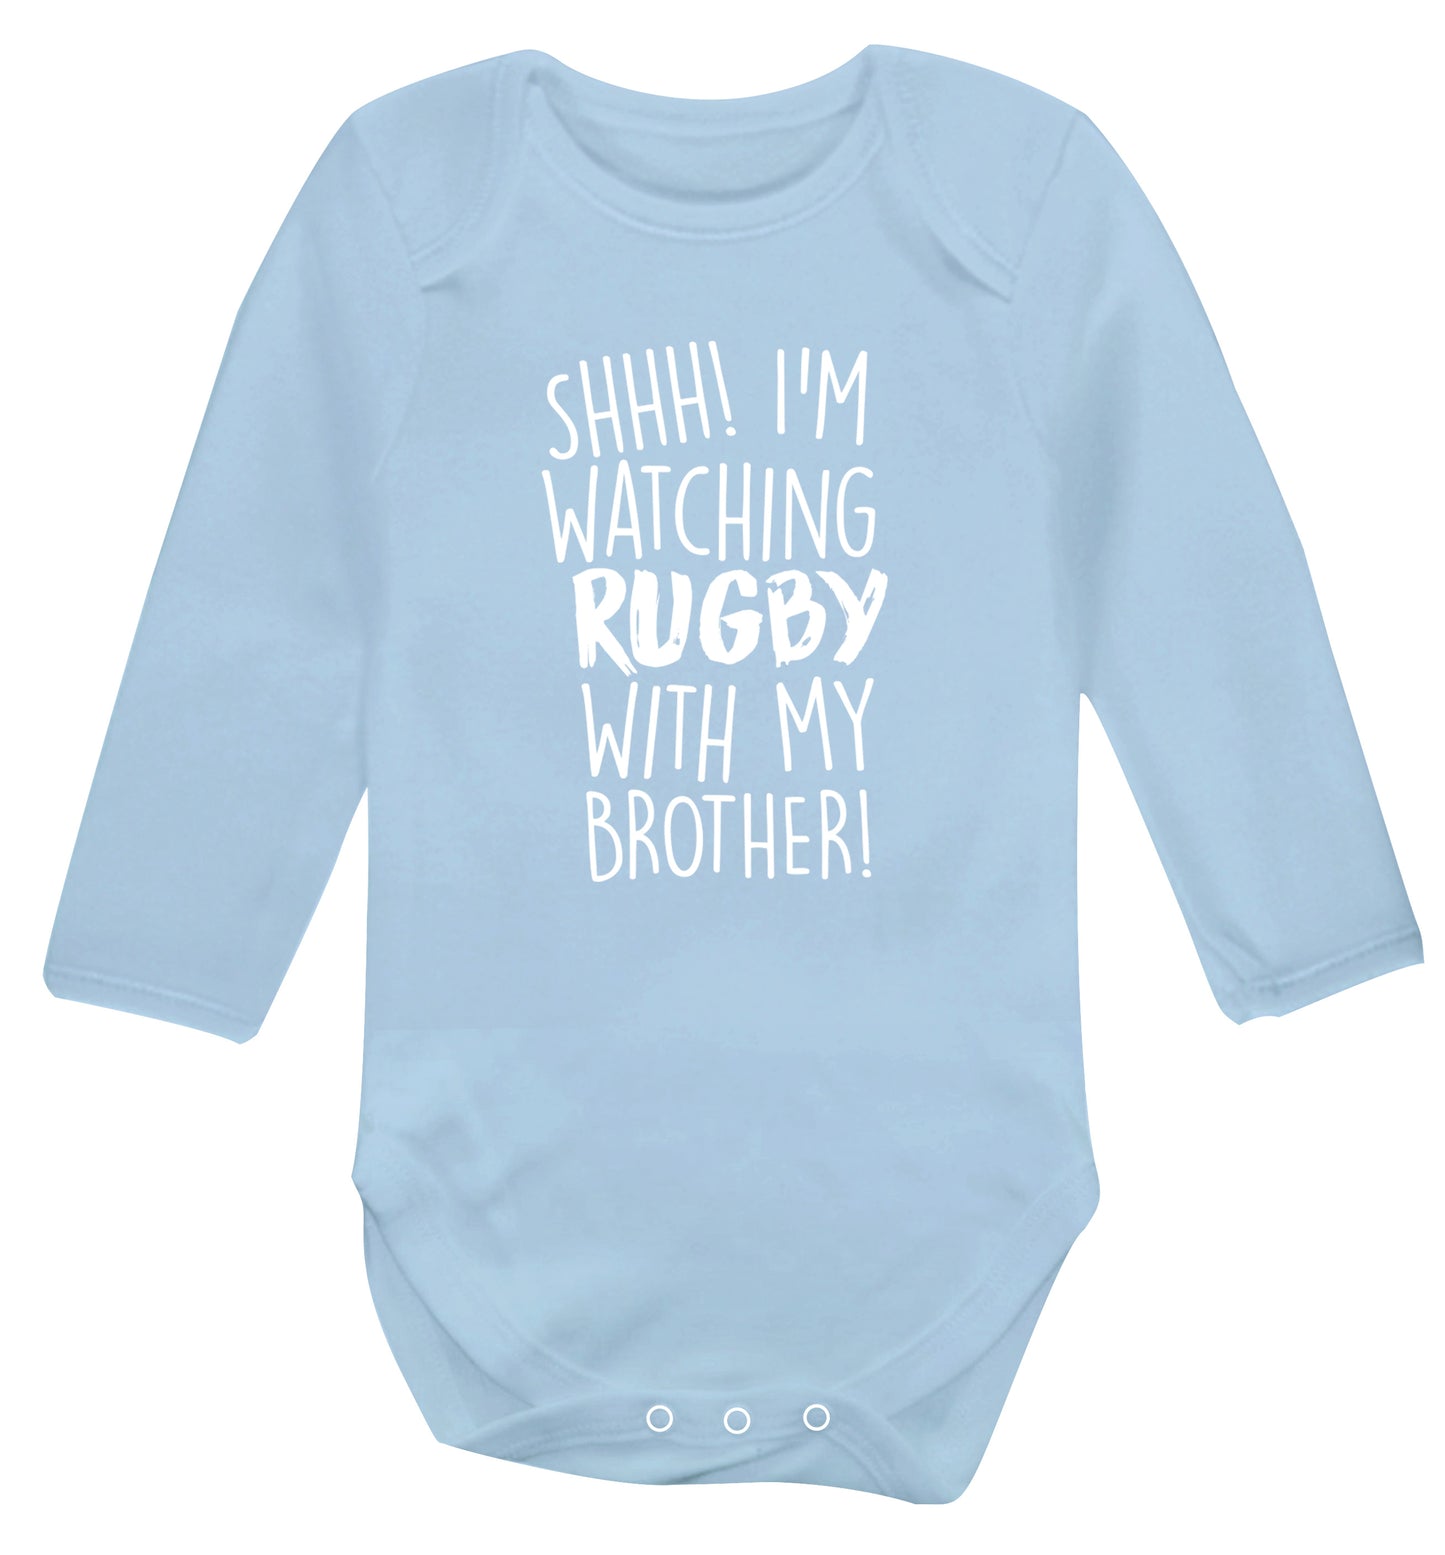 Shh... I'm watching rugby with my brother Baby Vest long sleeved pale blue 6-12 months